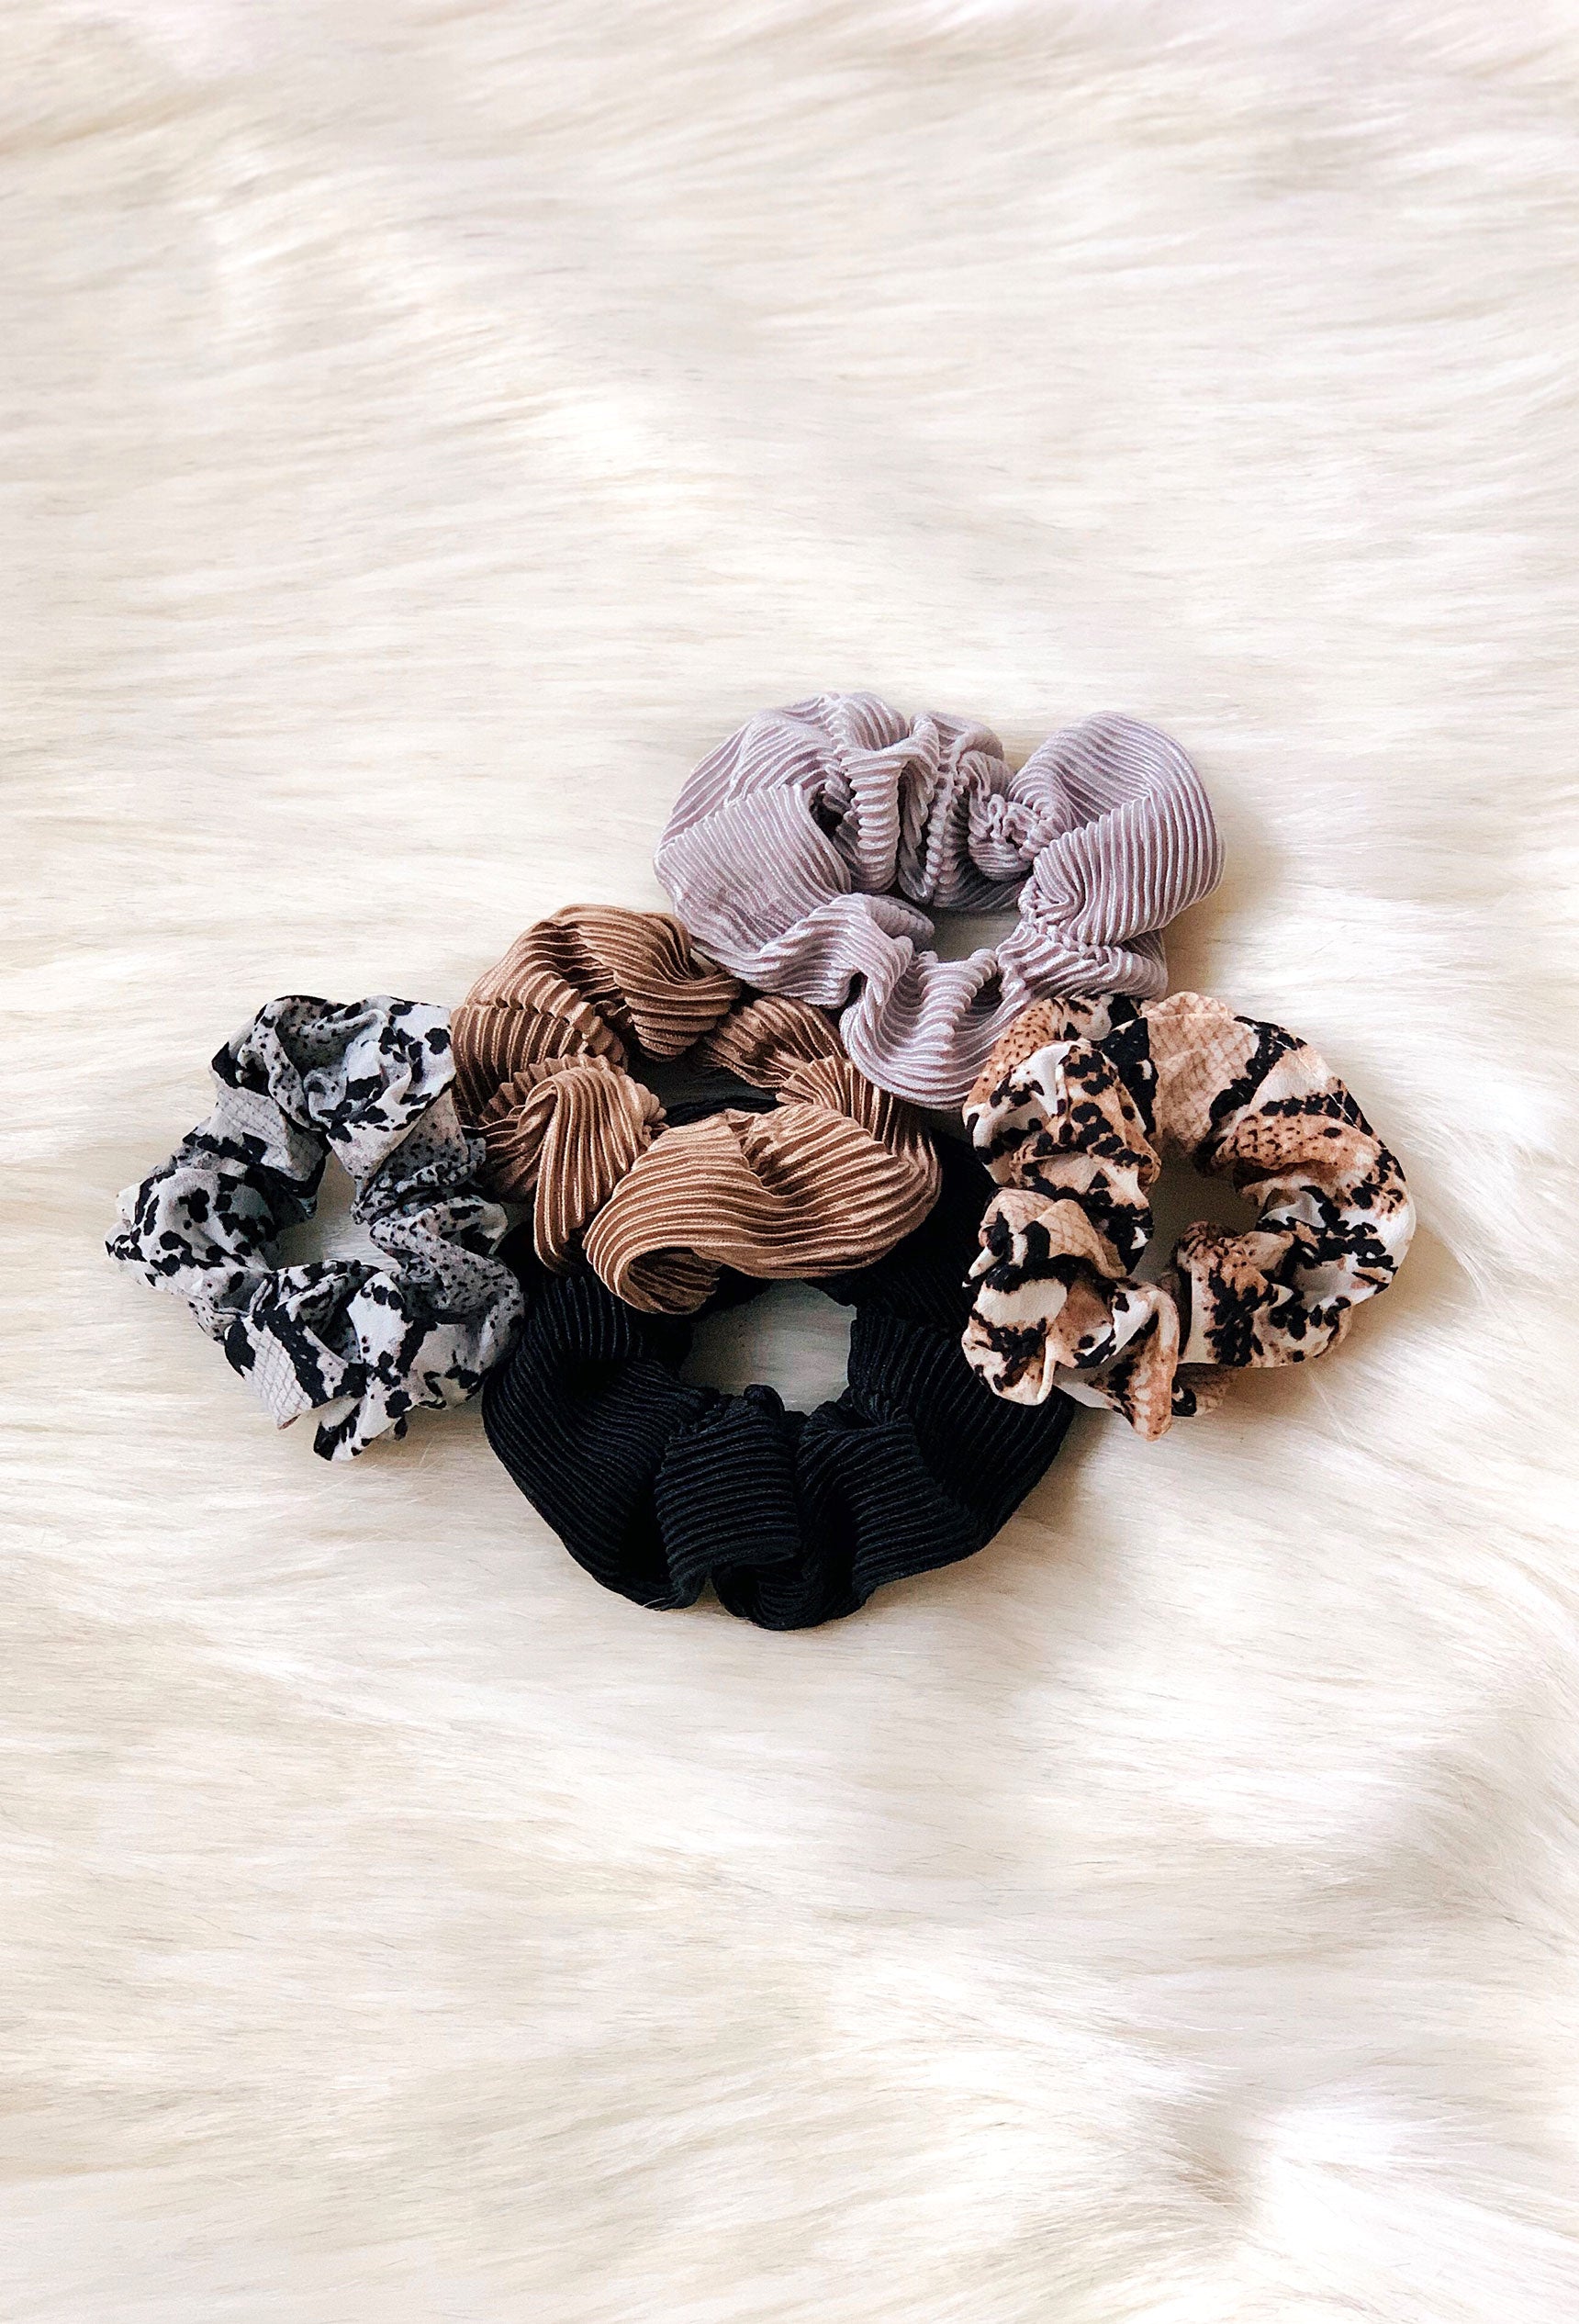 Scrunchie Set in Snake Print, set of 5 scrunchies with 3 solid colors and 2 snake printed ones 